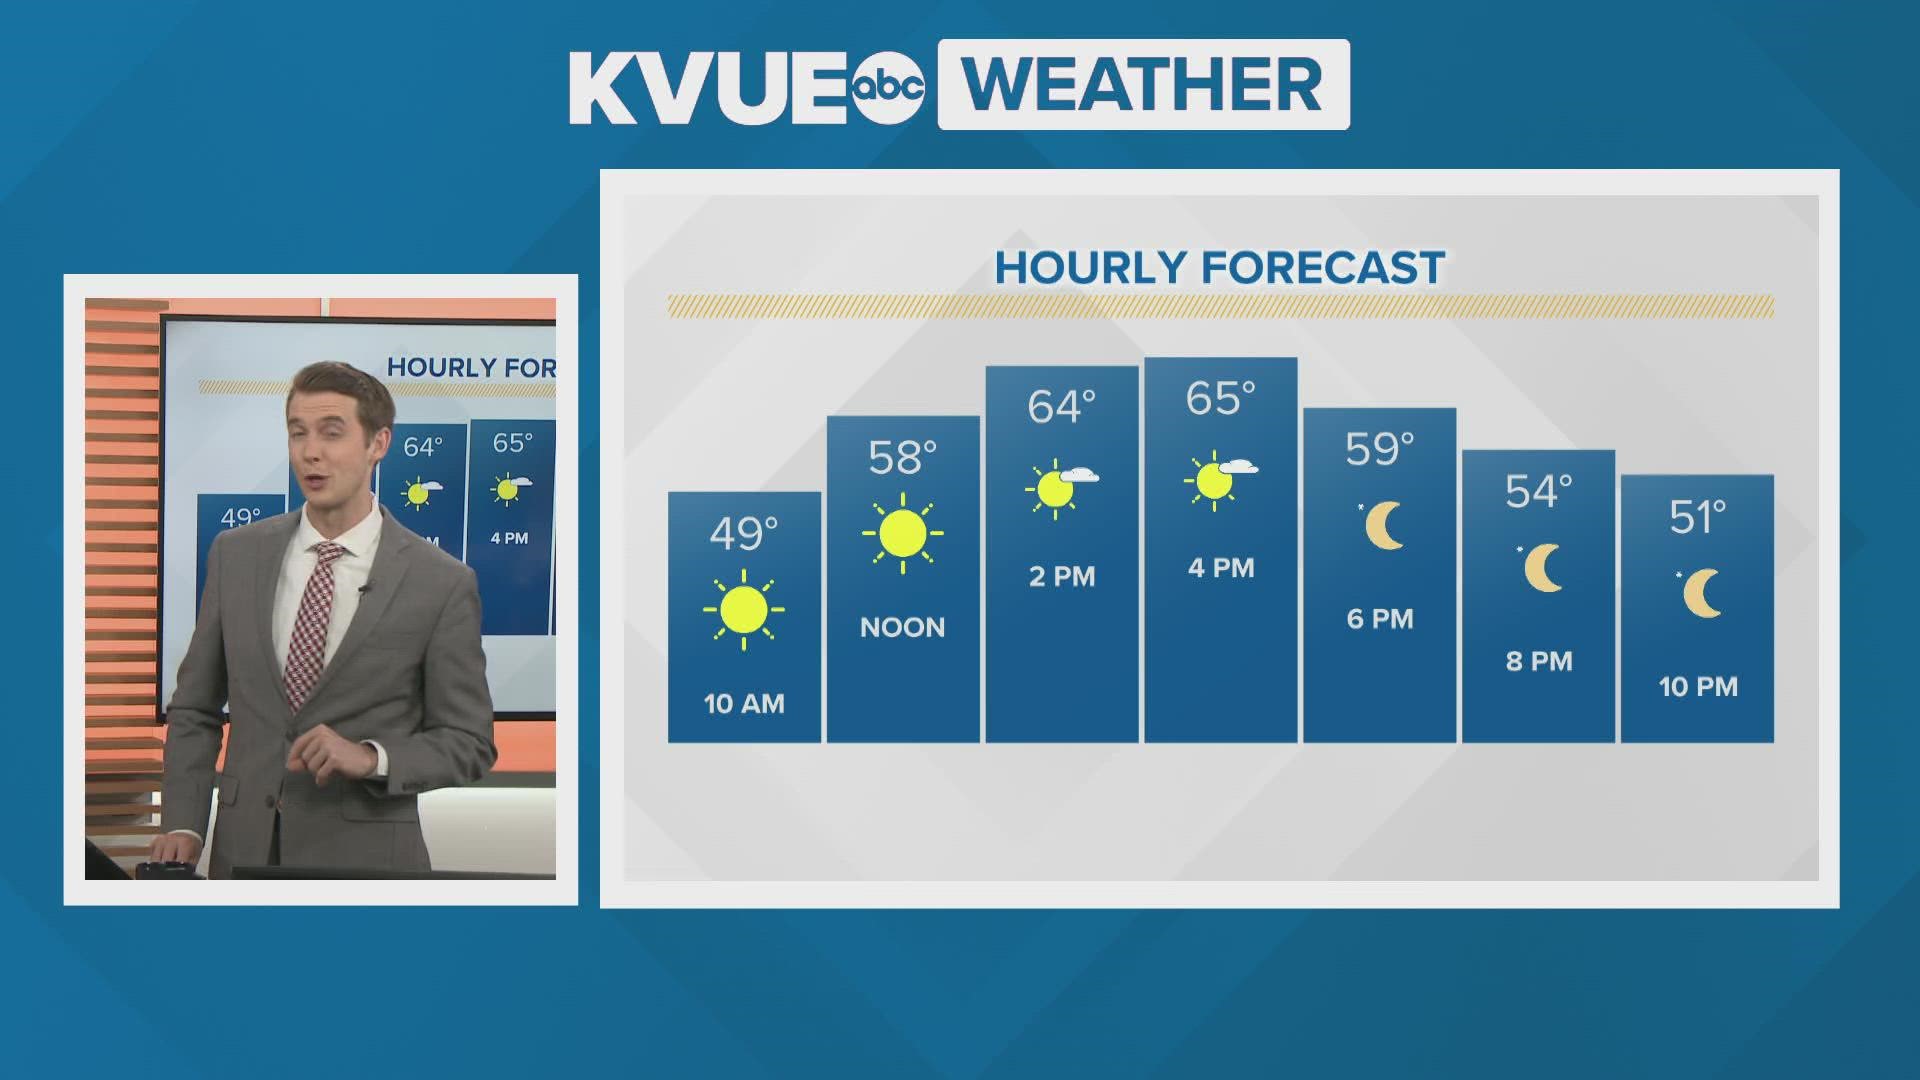 Shane Hinton has your extended weather forecast for the Austin area on Dec. 21.